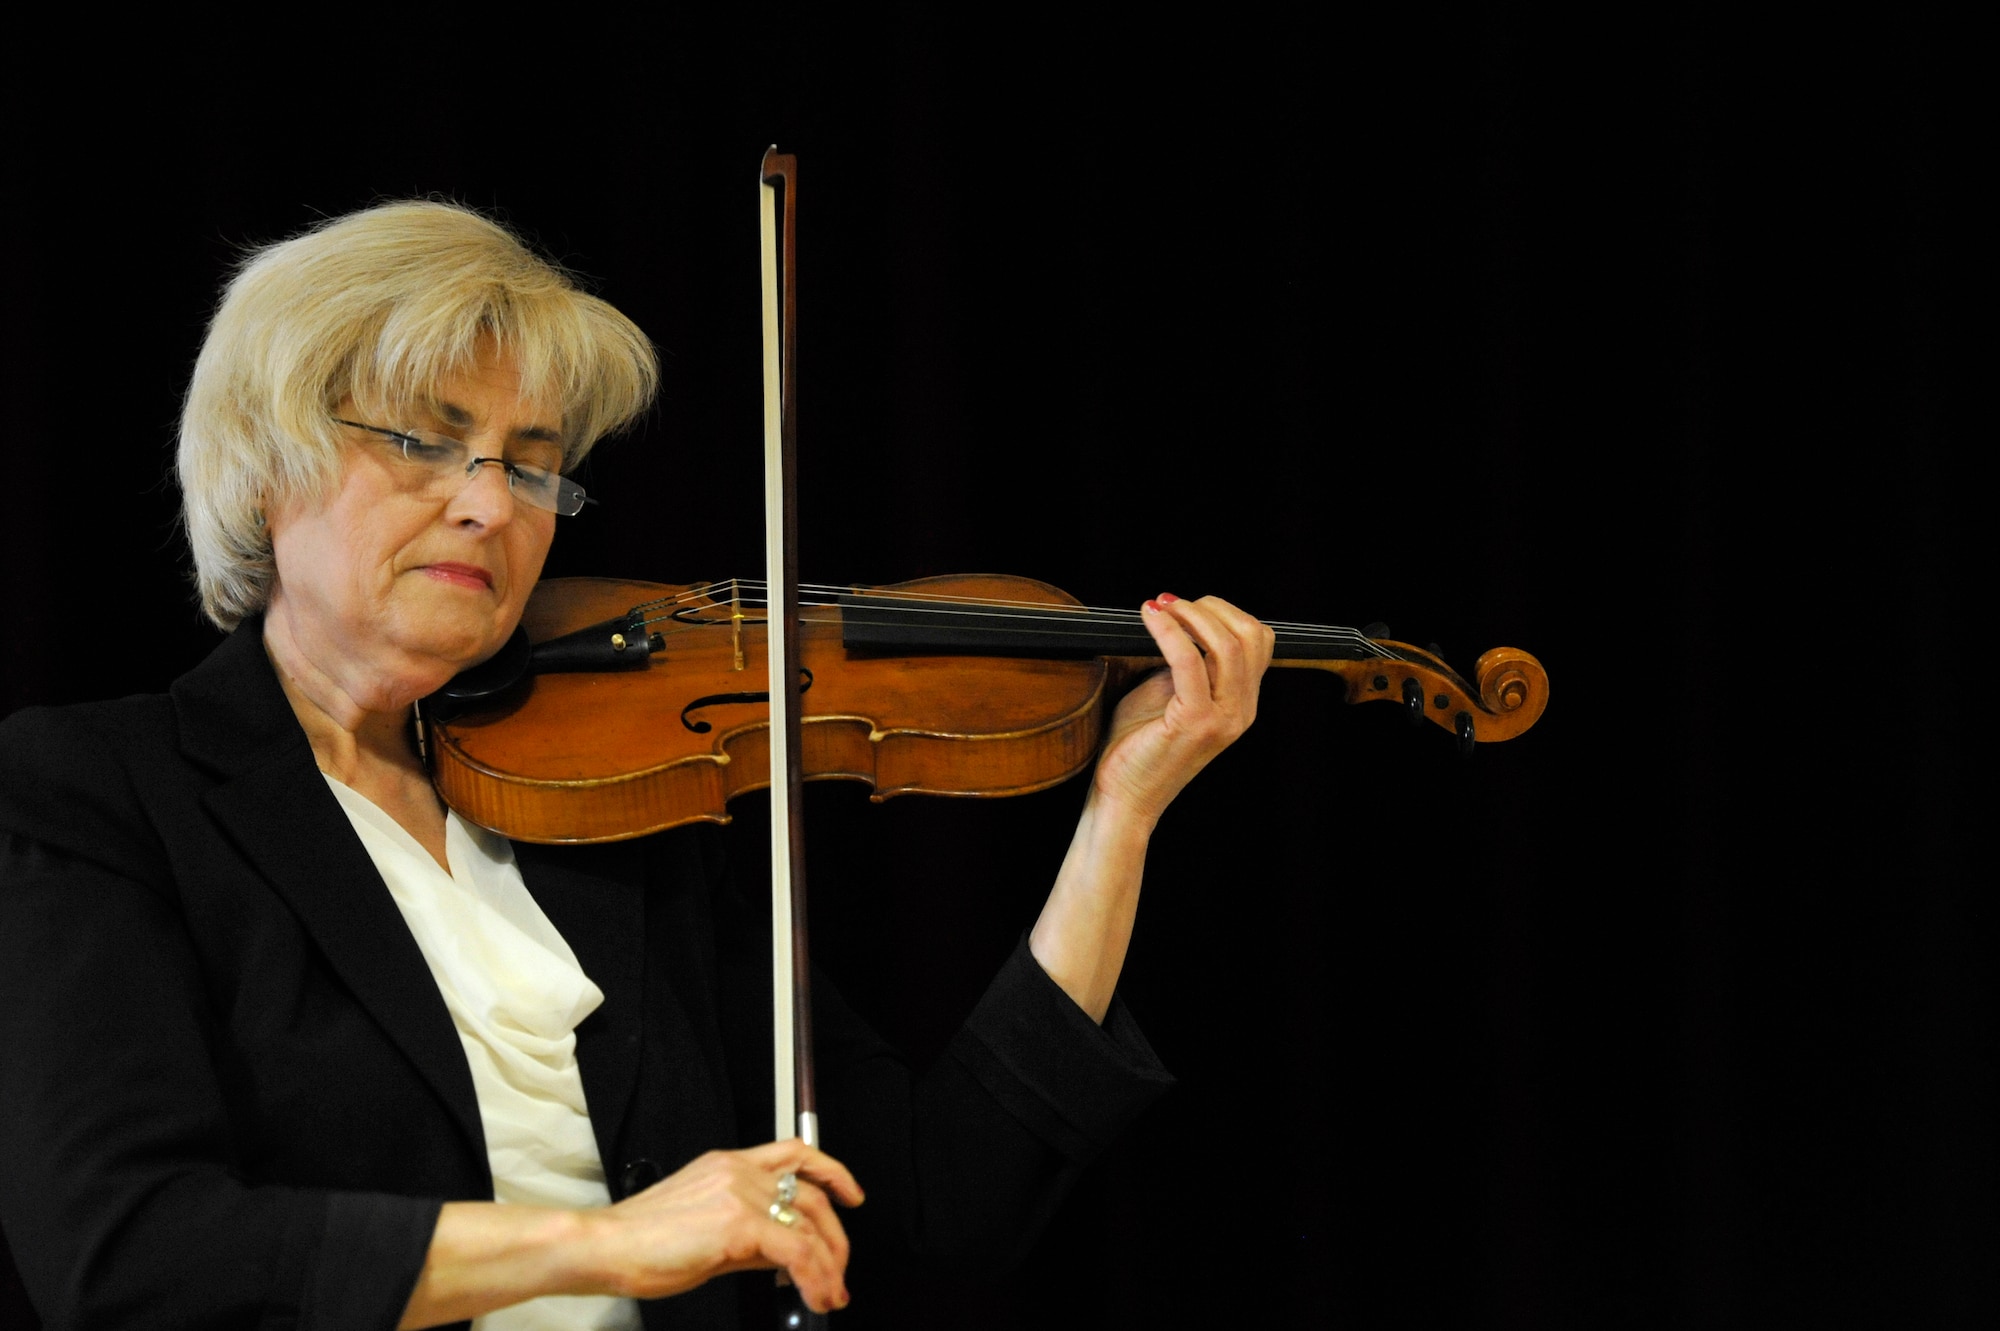 Alexandra Panchina, violinist, performs during the Holocaust day of remembrance event at the Ramstein Community Center, April 12, 2013. The event is aimed at remembering and honoring all the victims of the Holocaust. (U.S. Air Force photo/Senior Airman Aaron-Forrest Wainwright)